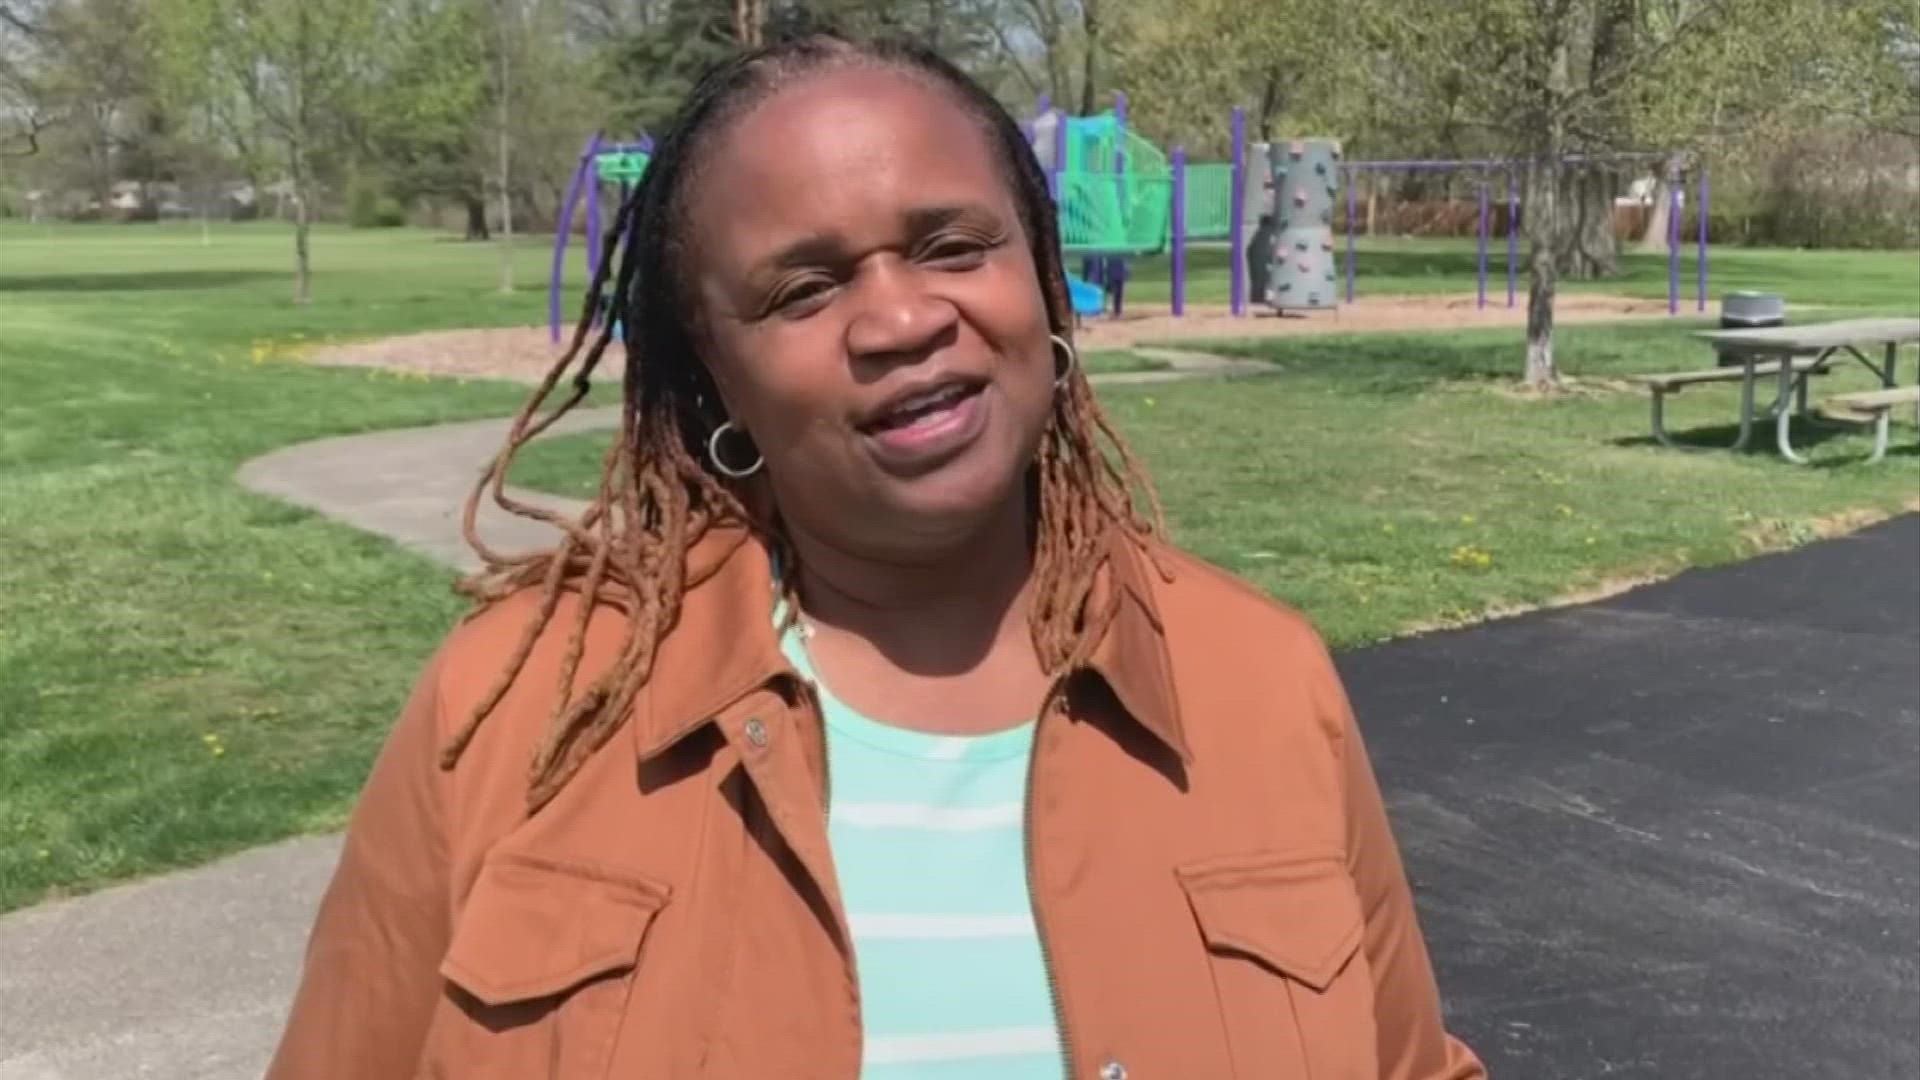 Bernita Reese, the Recreation and Parks Director for the City of Columbus says, "This is a time when we connect individuals around our community."